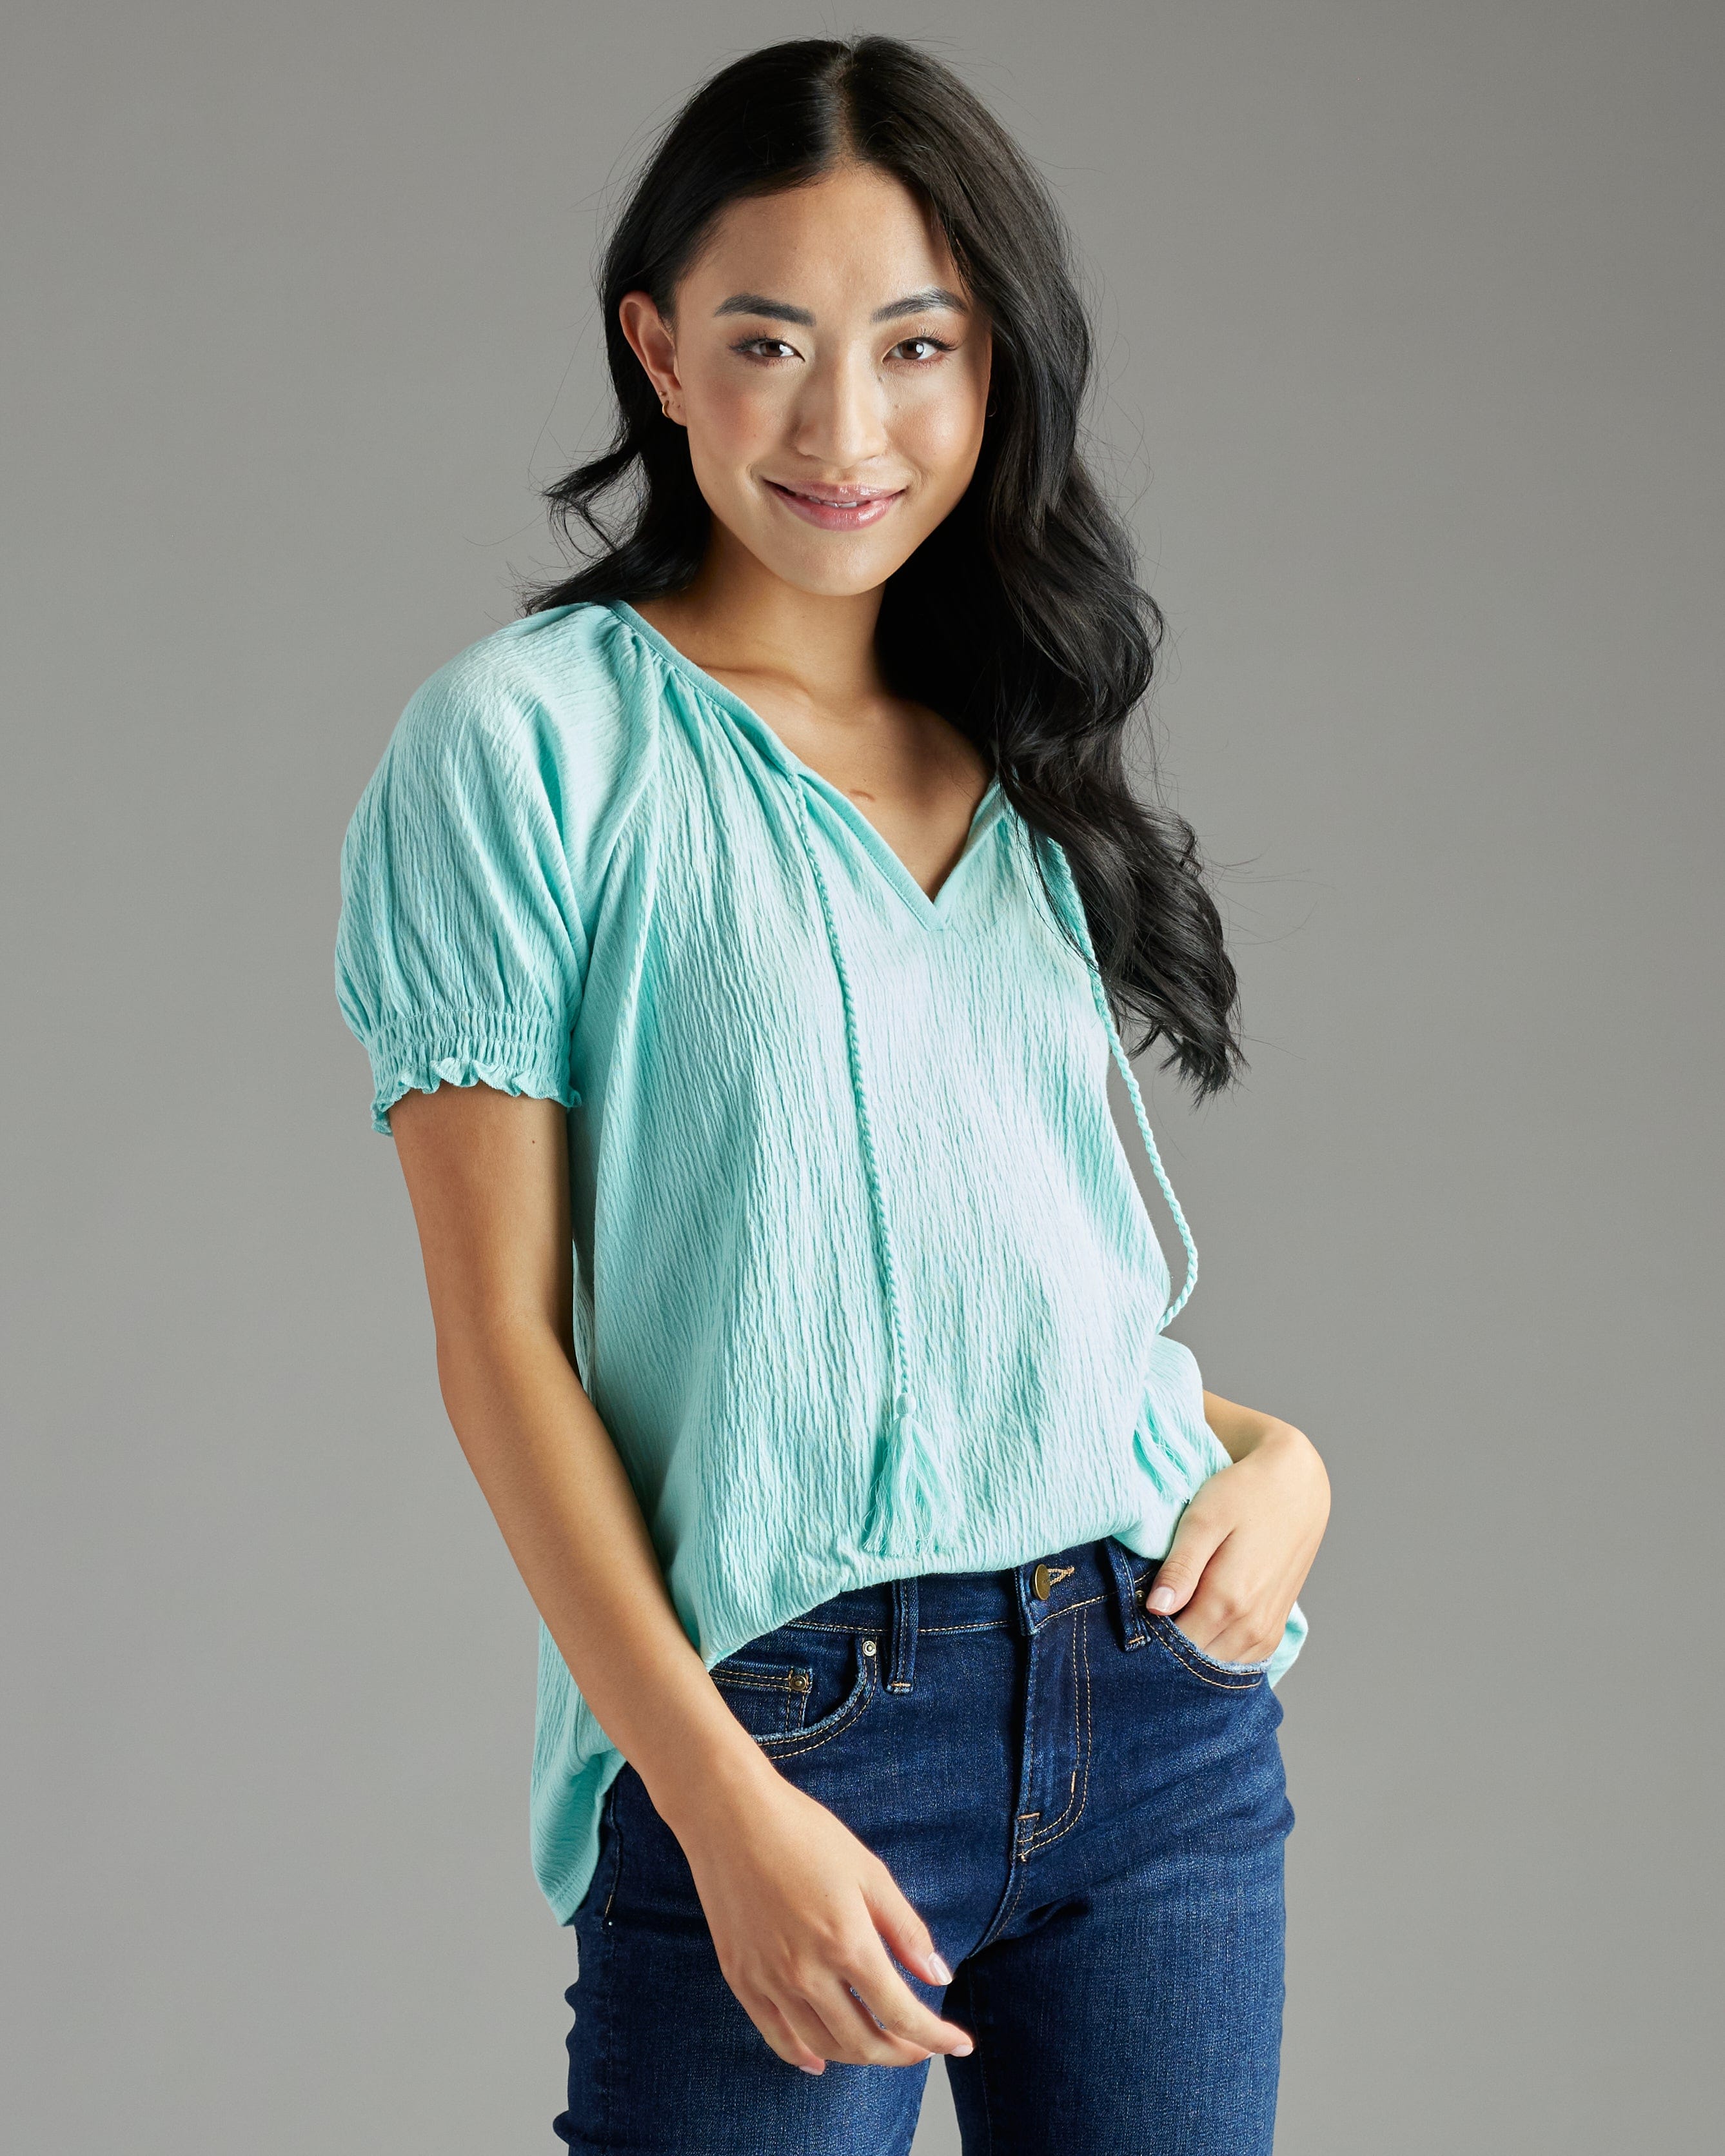 Woman in a blue short sleeved blouse